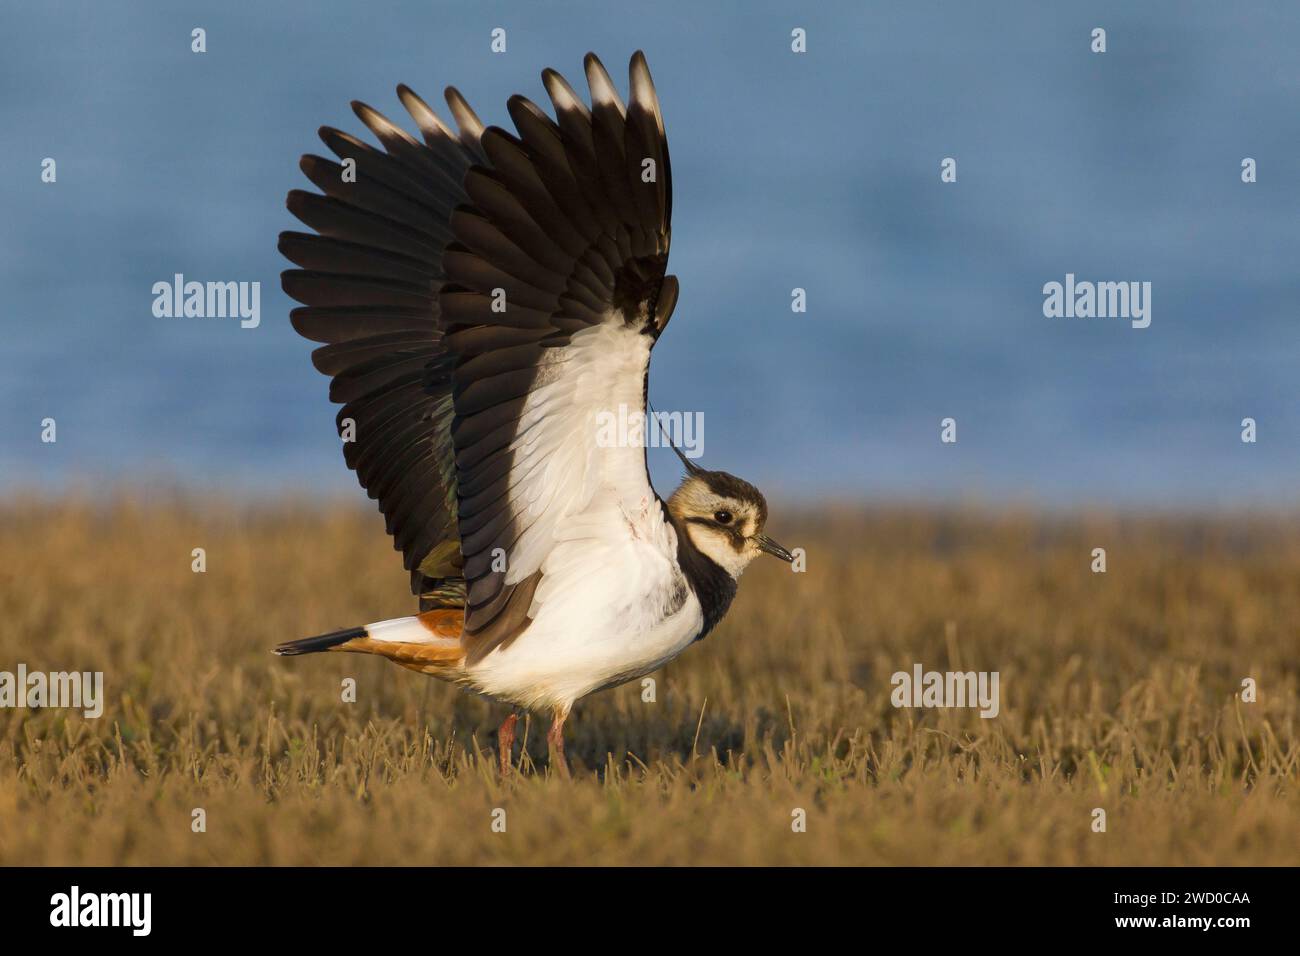 northern lapwing, peewit, pewit, tuit, tewit, green plover, pyewipe (Vanellus vanellus), in a marsh with outstretched wings, side view, Italy, Tuscany Stock Photo